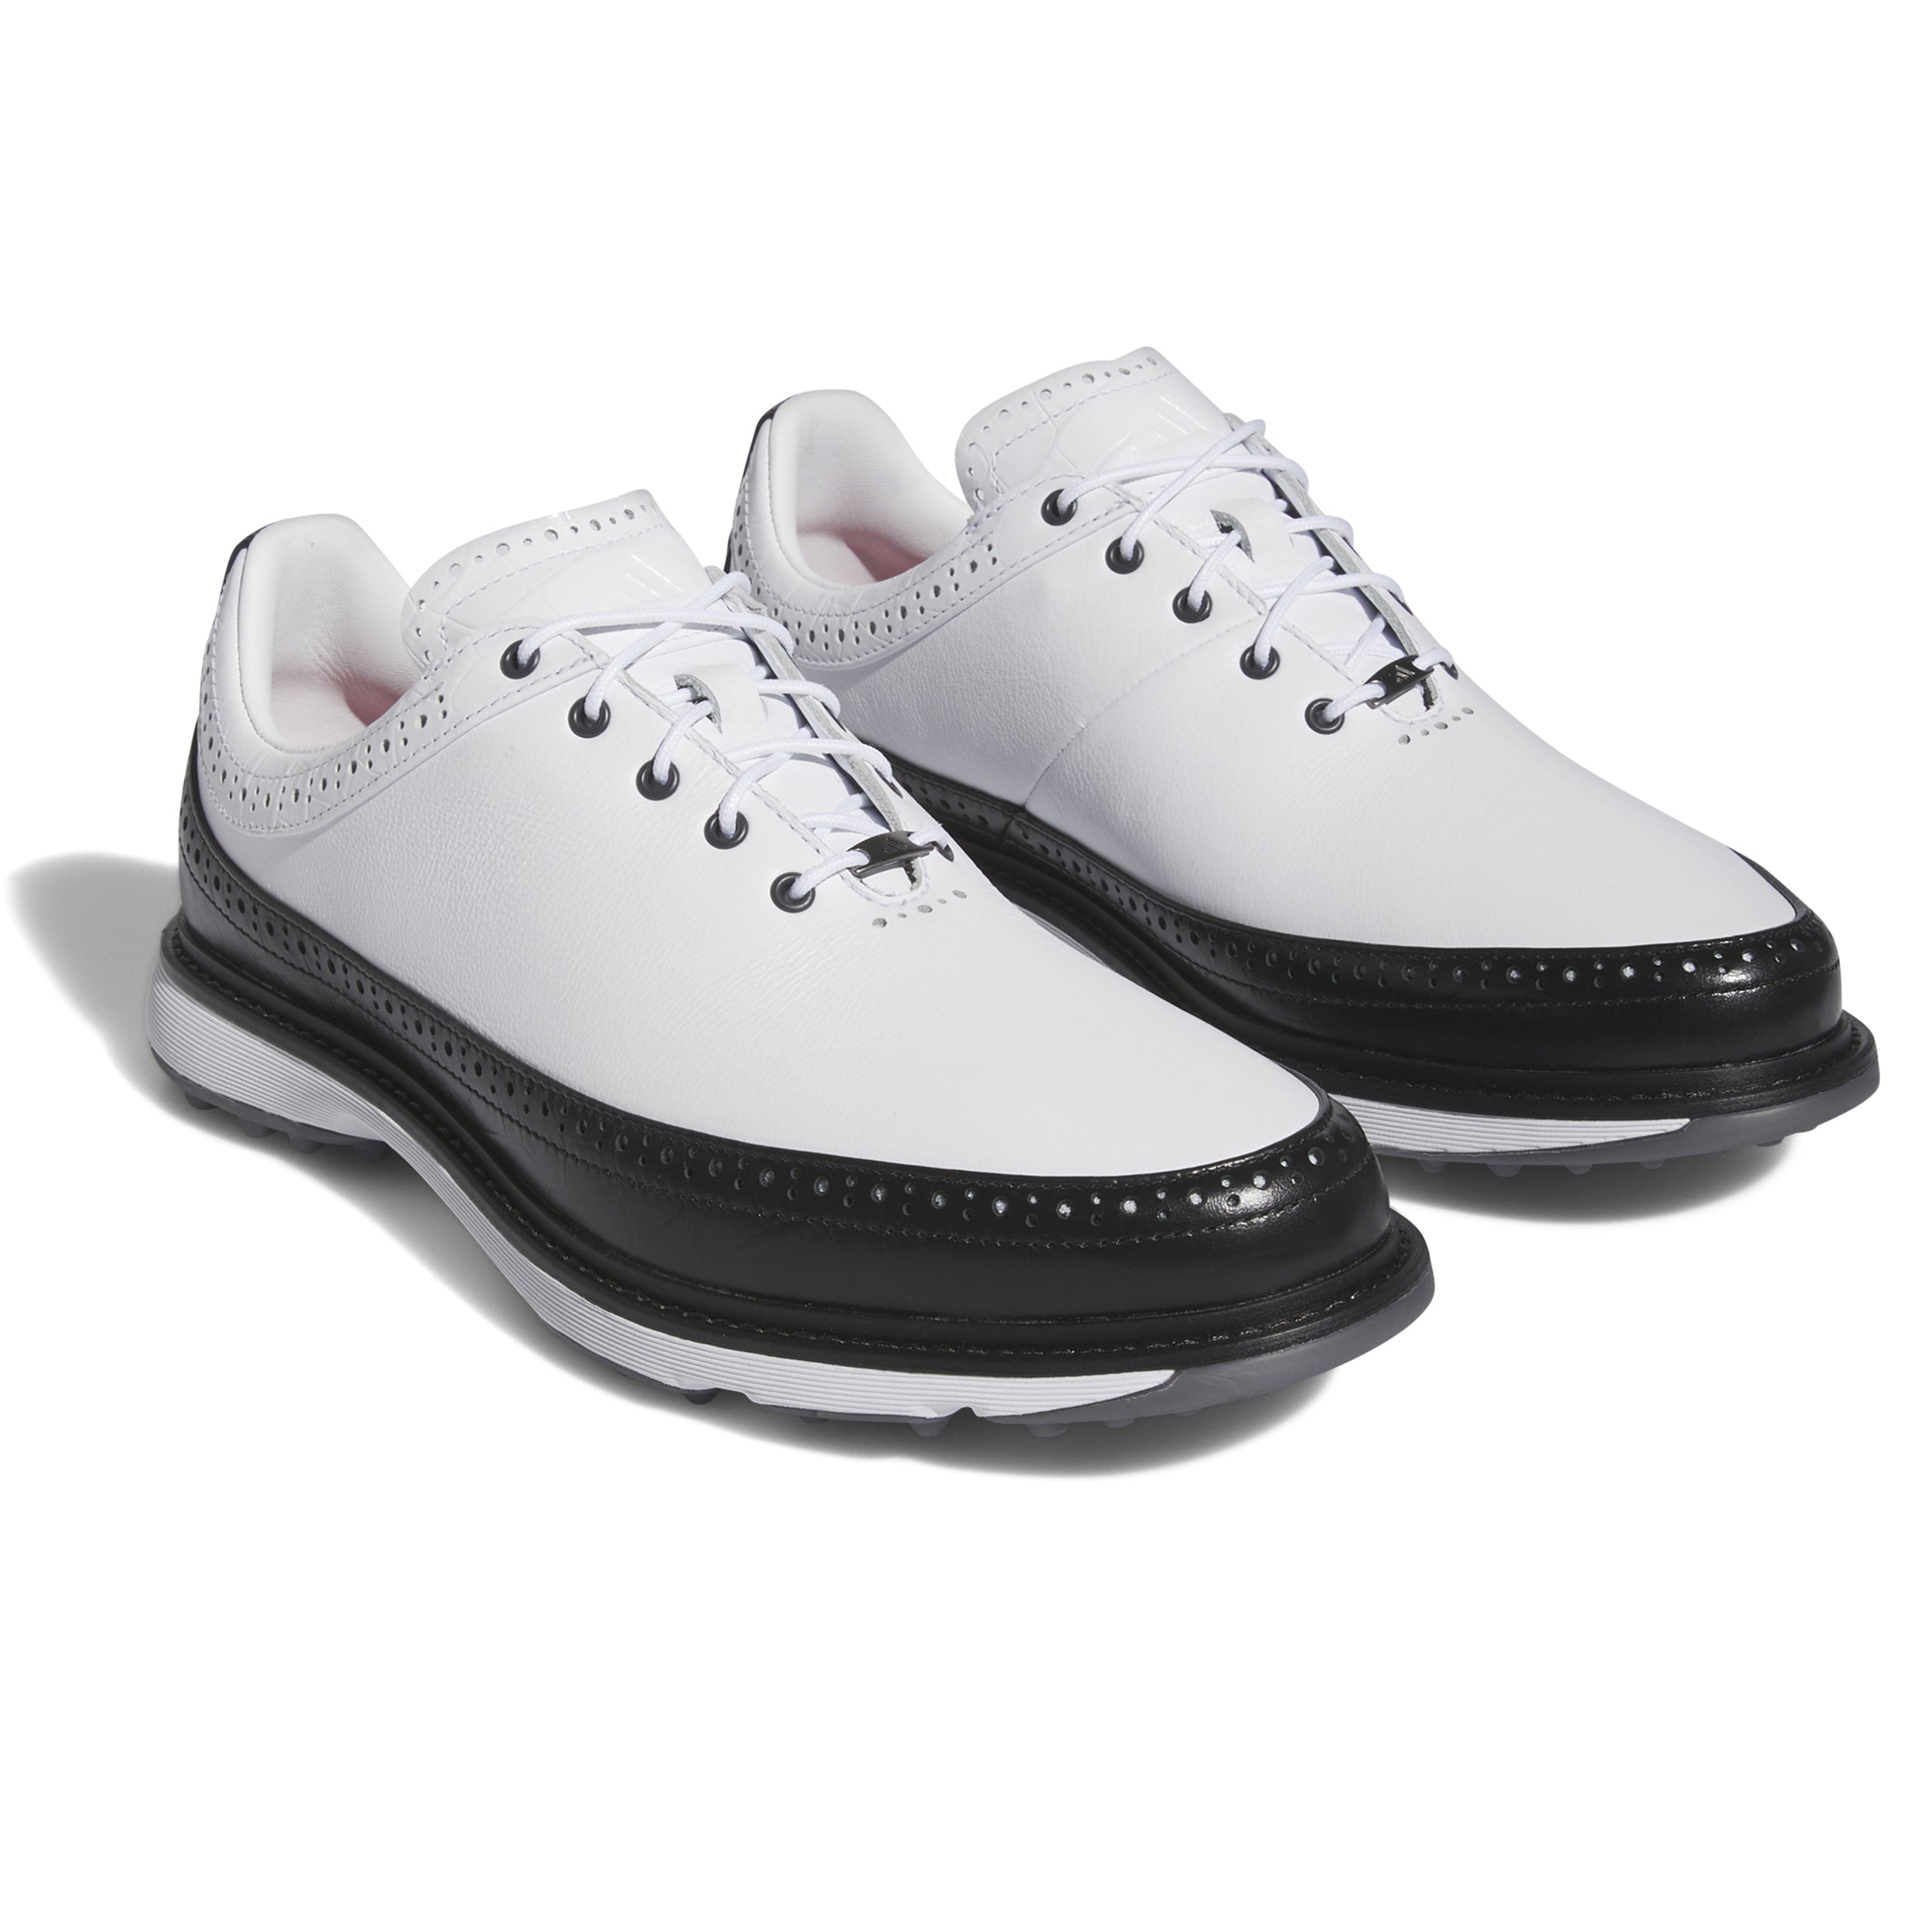 adidas MC80 Golf Shoes ID4750 White Core Black Bright Red | Function18